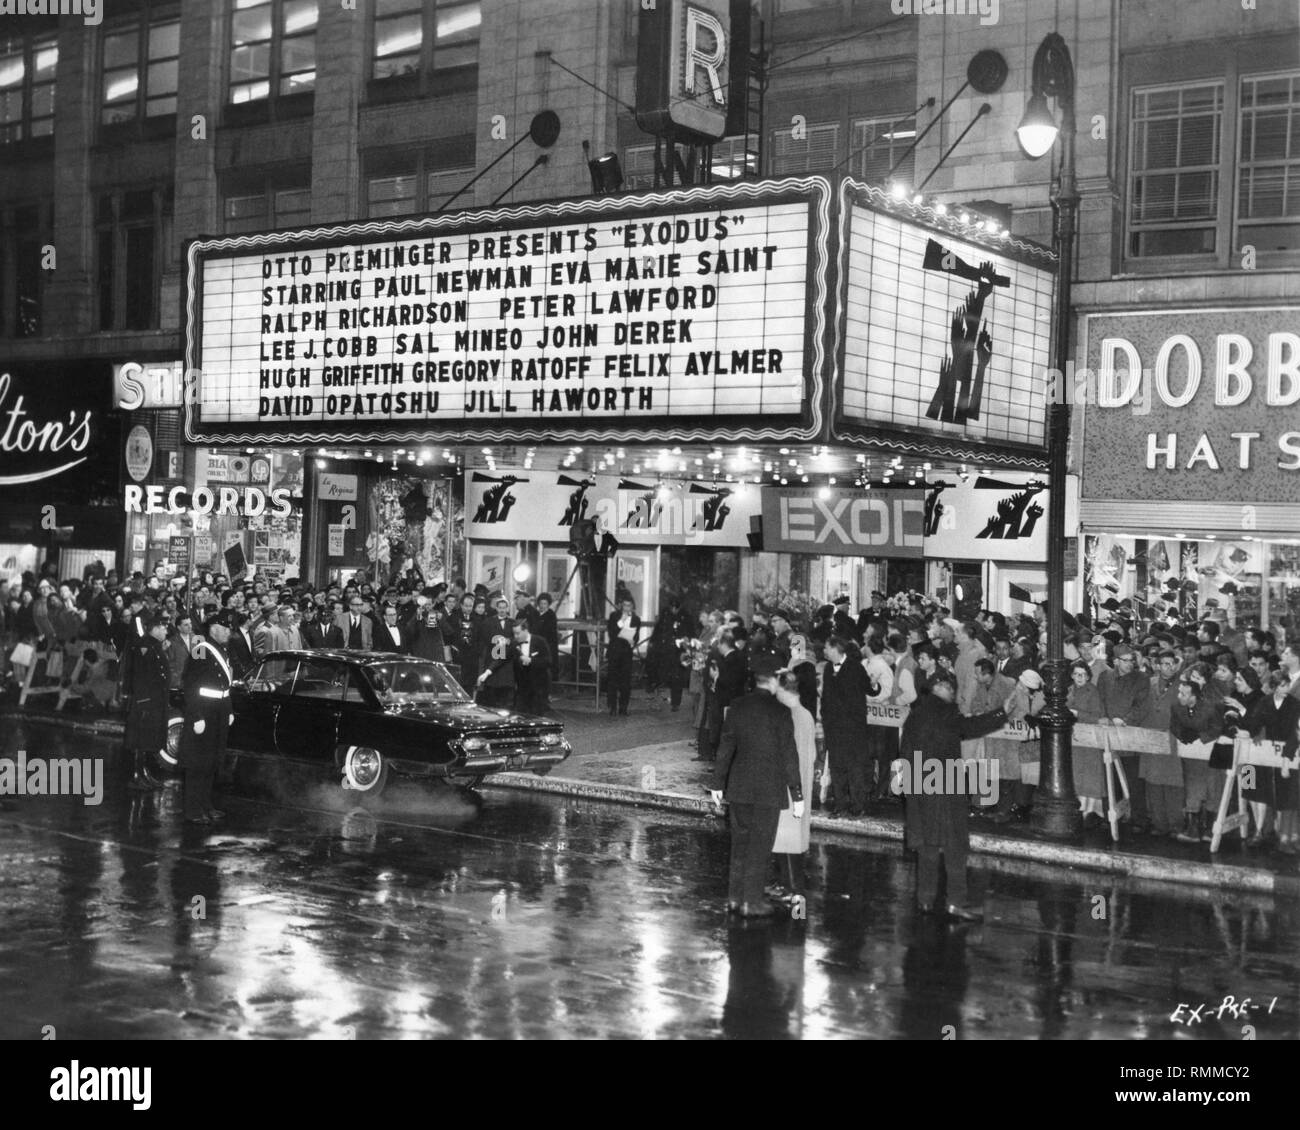 EXODUS 1960 New York Premiere December 15 1960 Movie Theater Theatre Cinema Starring Paul Newman Eva Marie Saint Ralph Richardson Peter Lawford Sal Mineo directed by Otto Preminger screenplay Dalton Trumbo from novel by Leon Uris Saul Bass display art ( released by United Artists ) Stock Photo